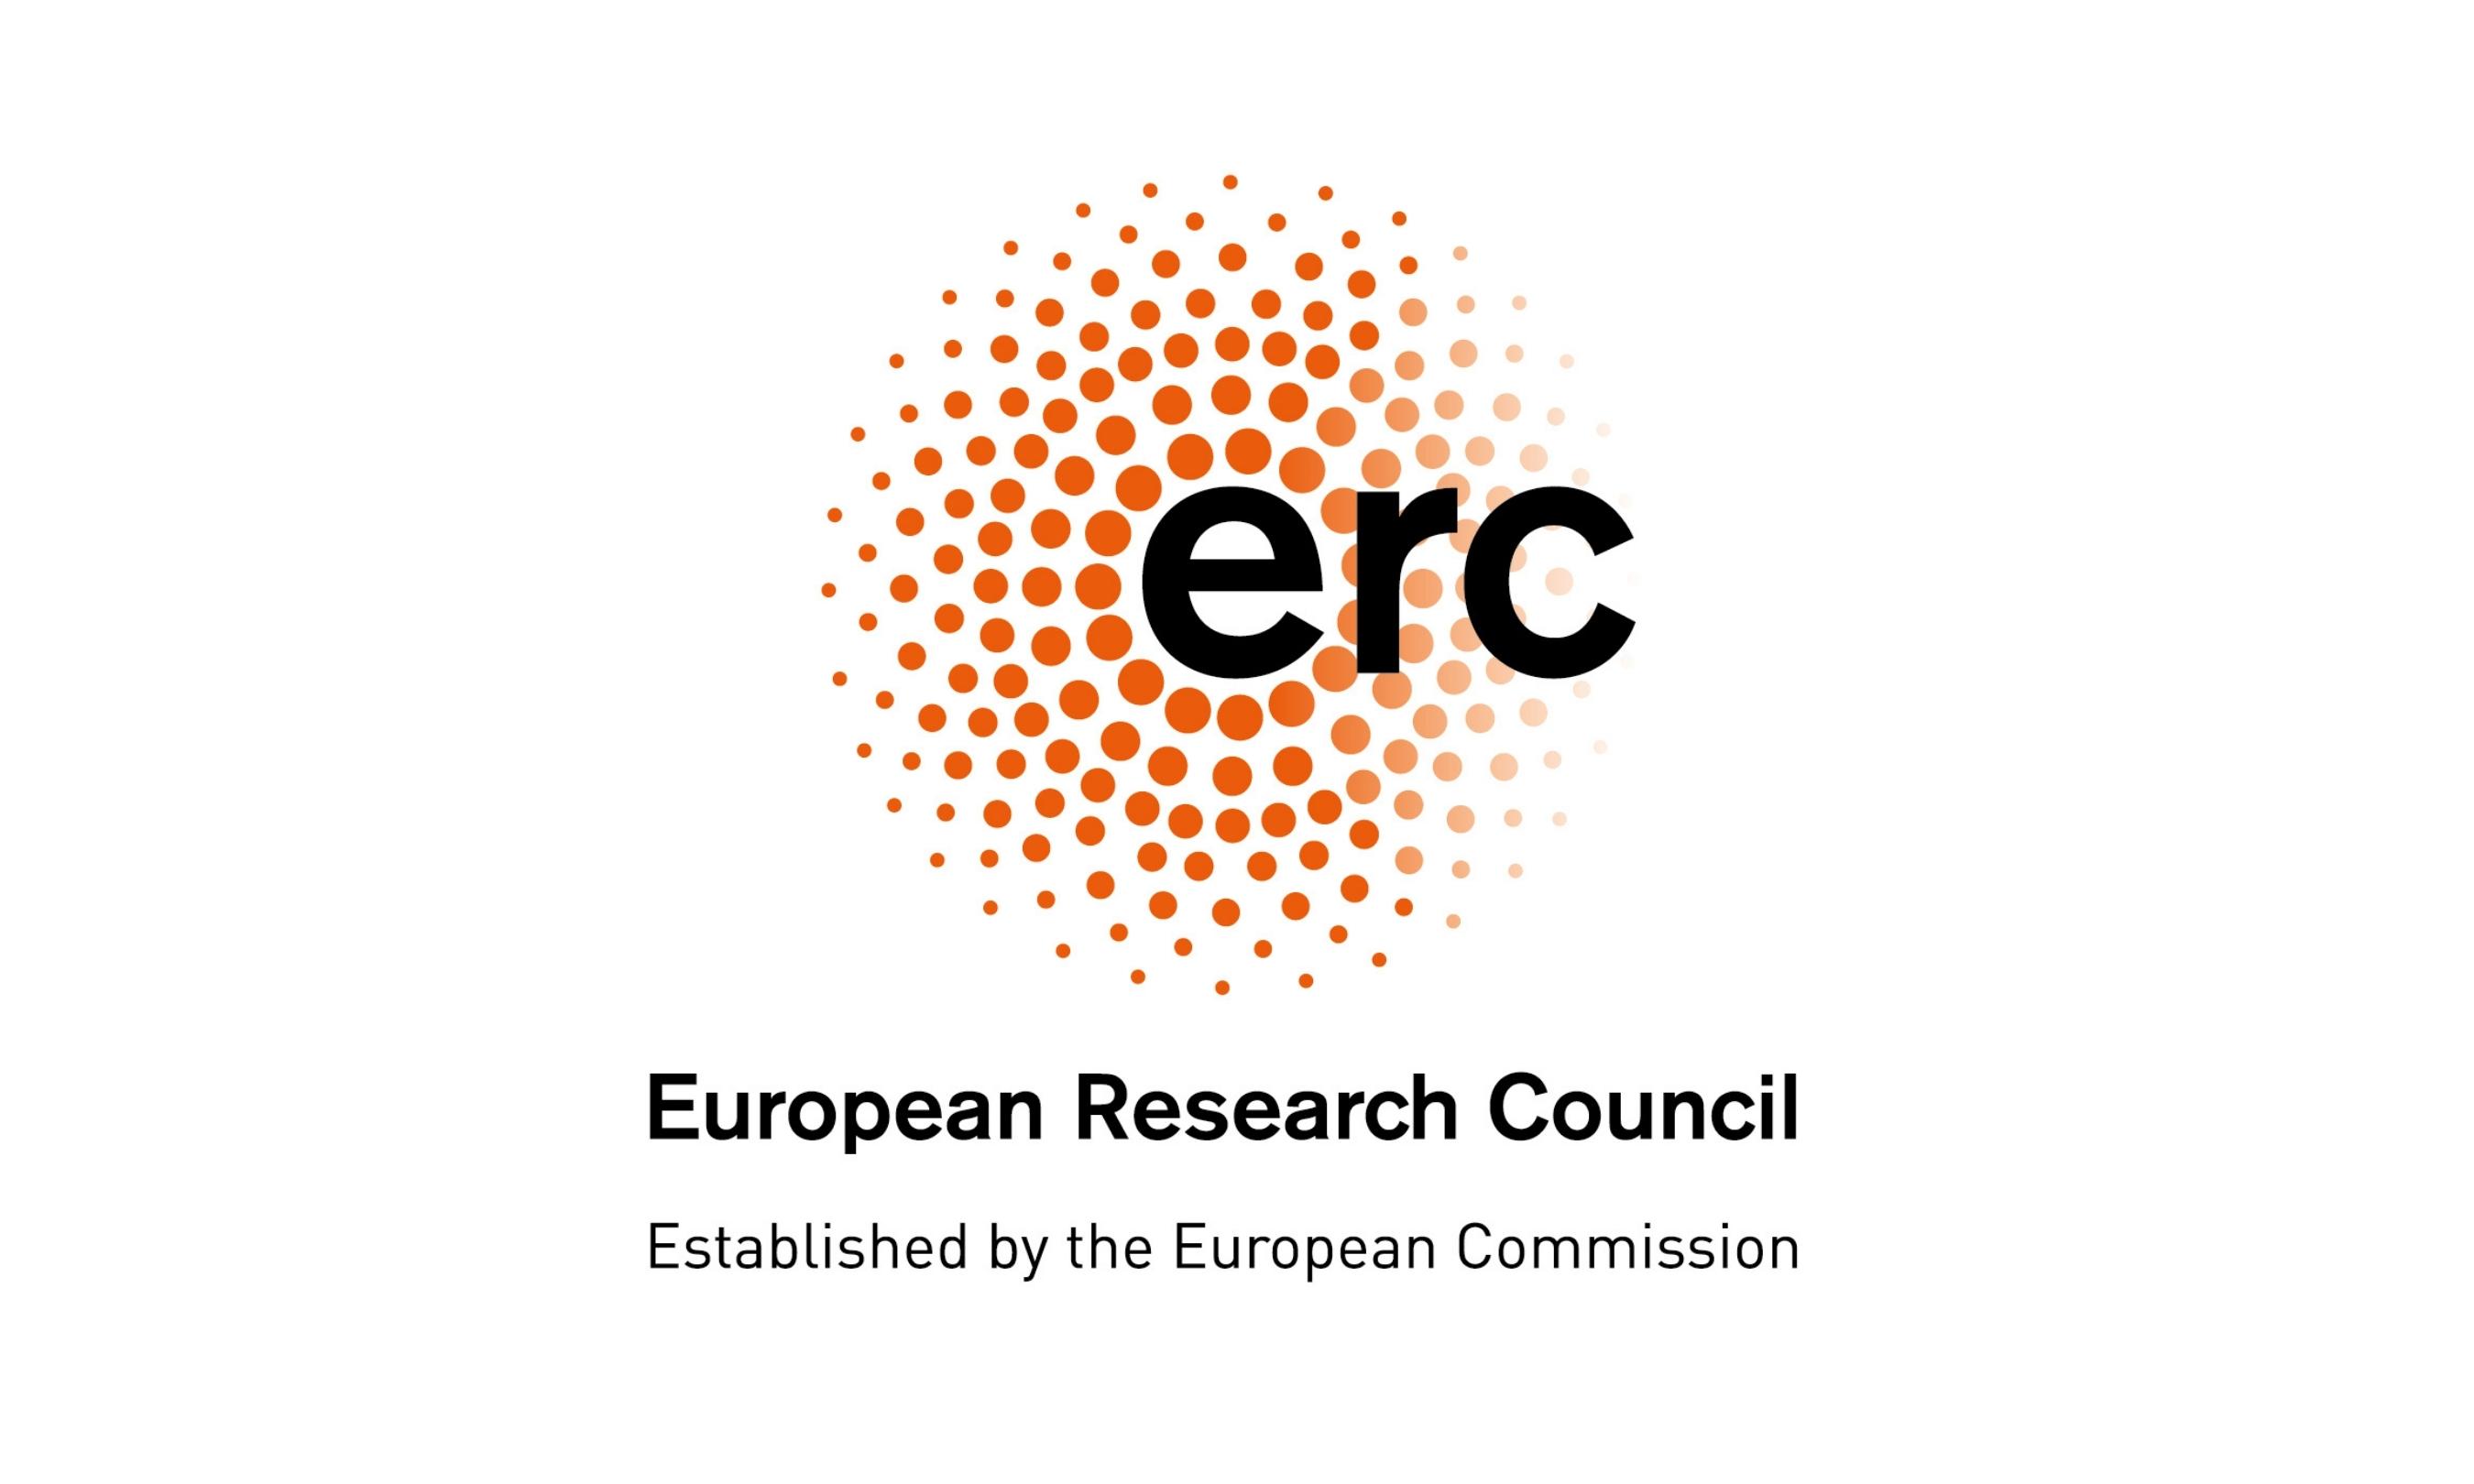 Cover image of ERC awards over €600 million to Europe's top researchers